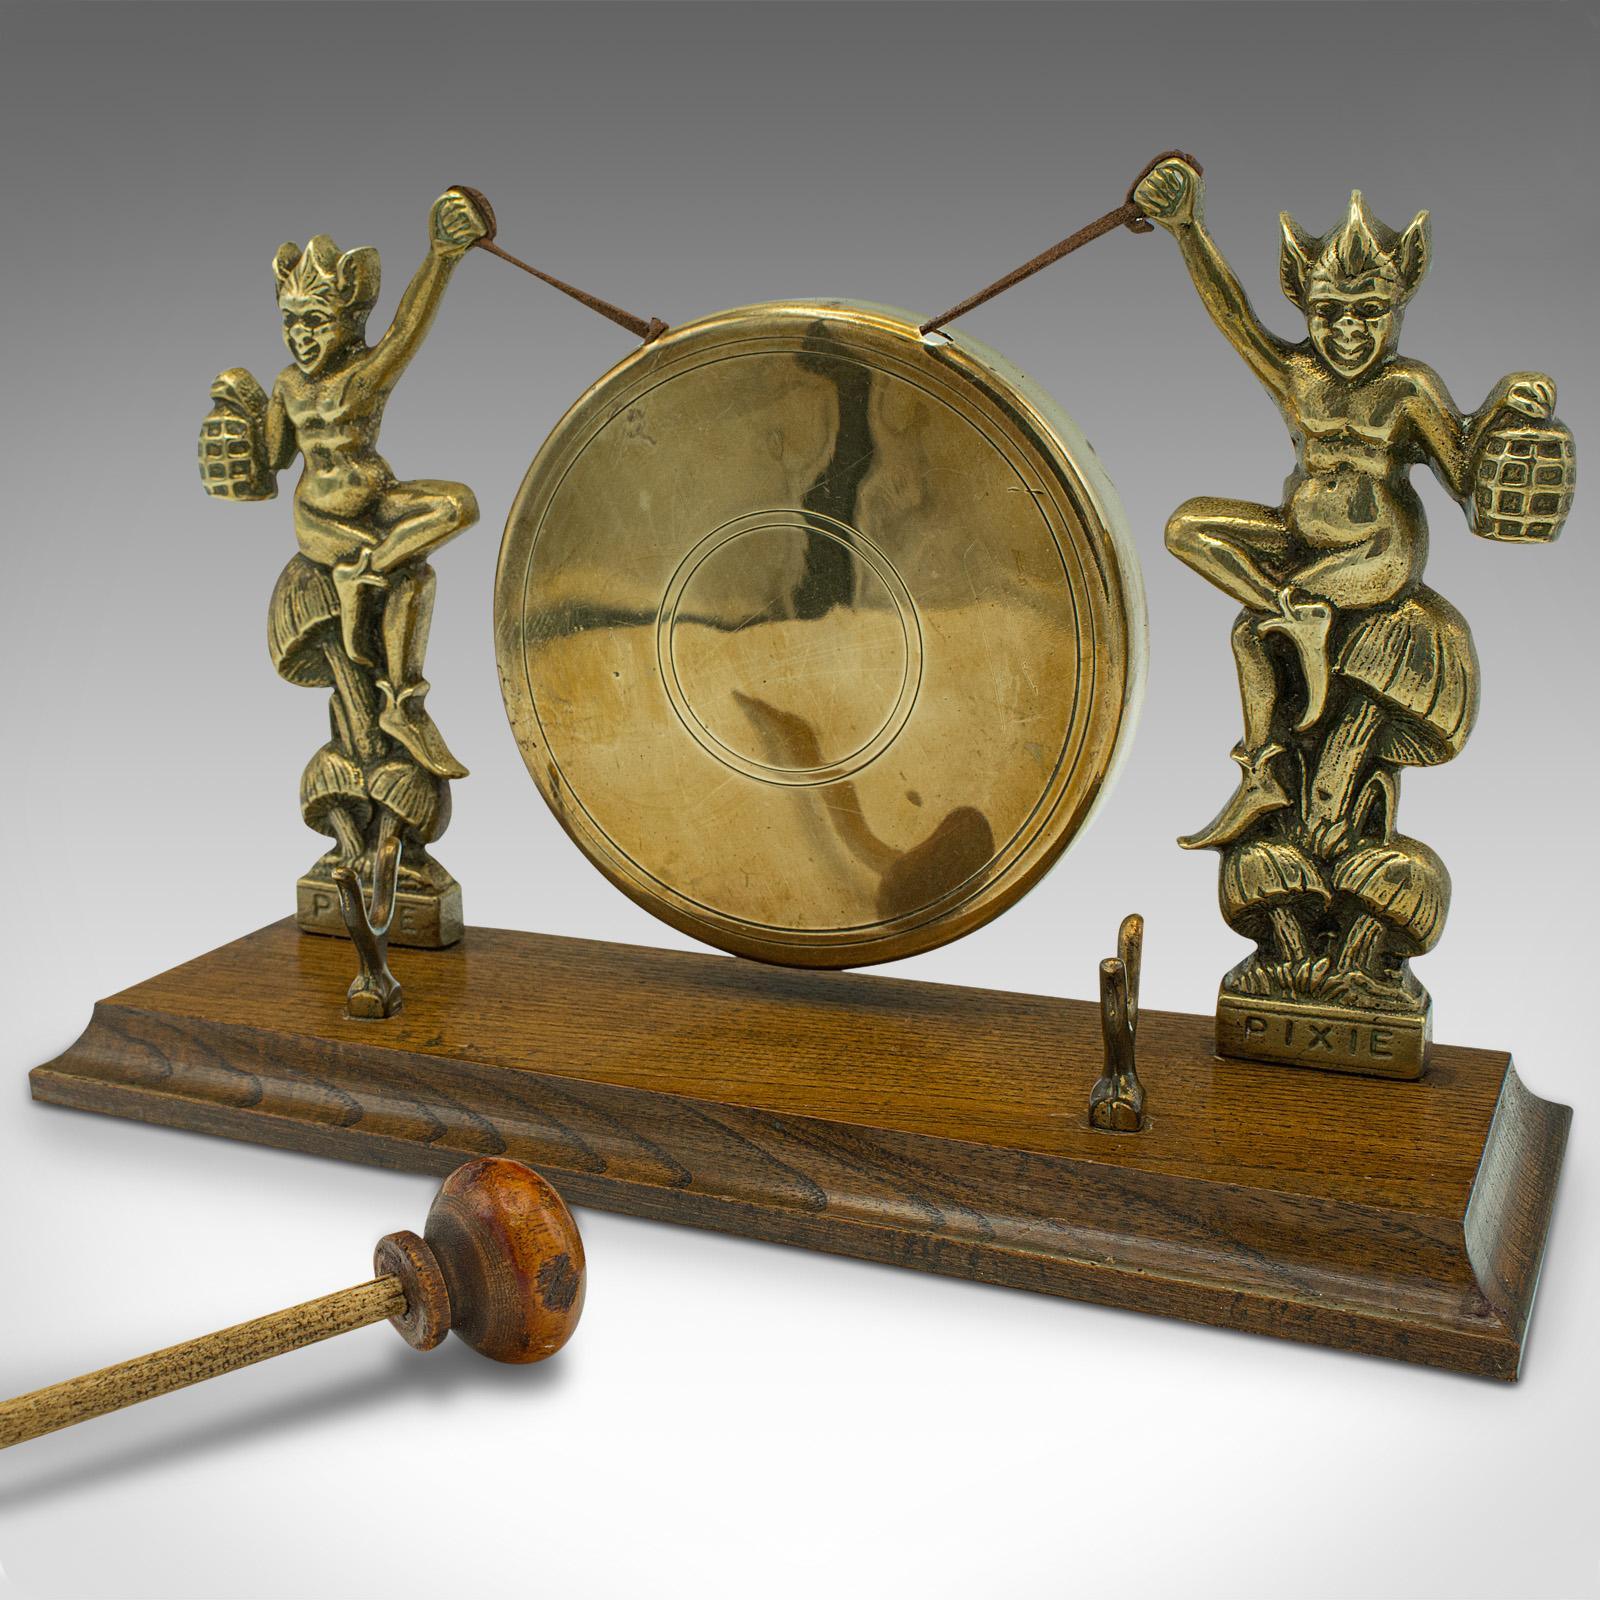 Antique Cornish Pixie Gong, English, Brass, Oak, Dinner Chime, Victorian, C.1900 For Sale 3